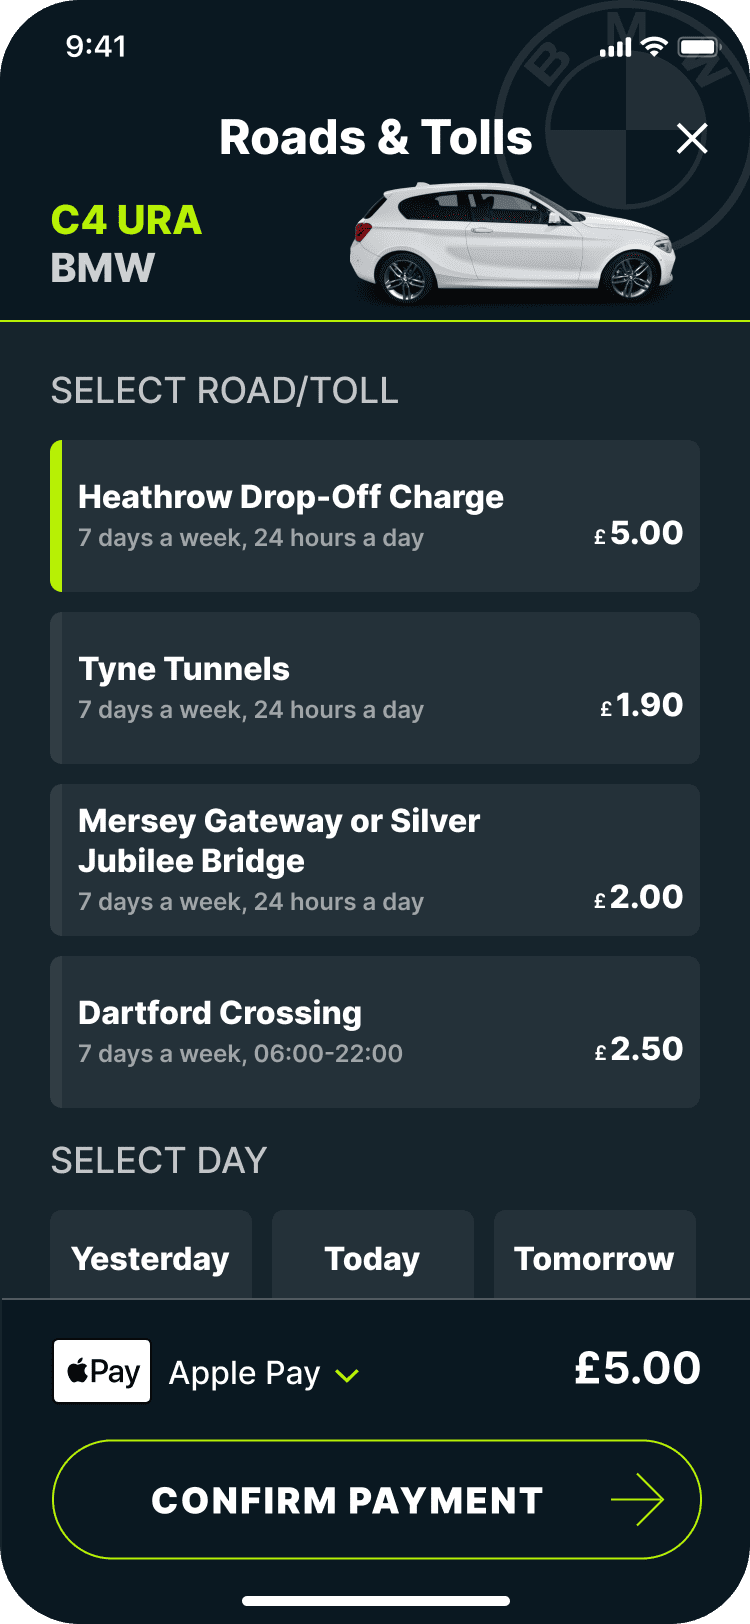 Heathrow toll charge in Caura app